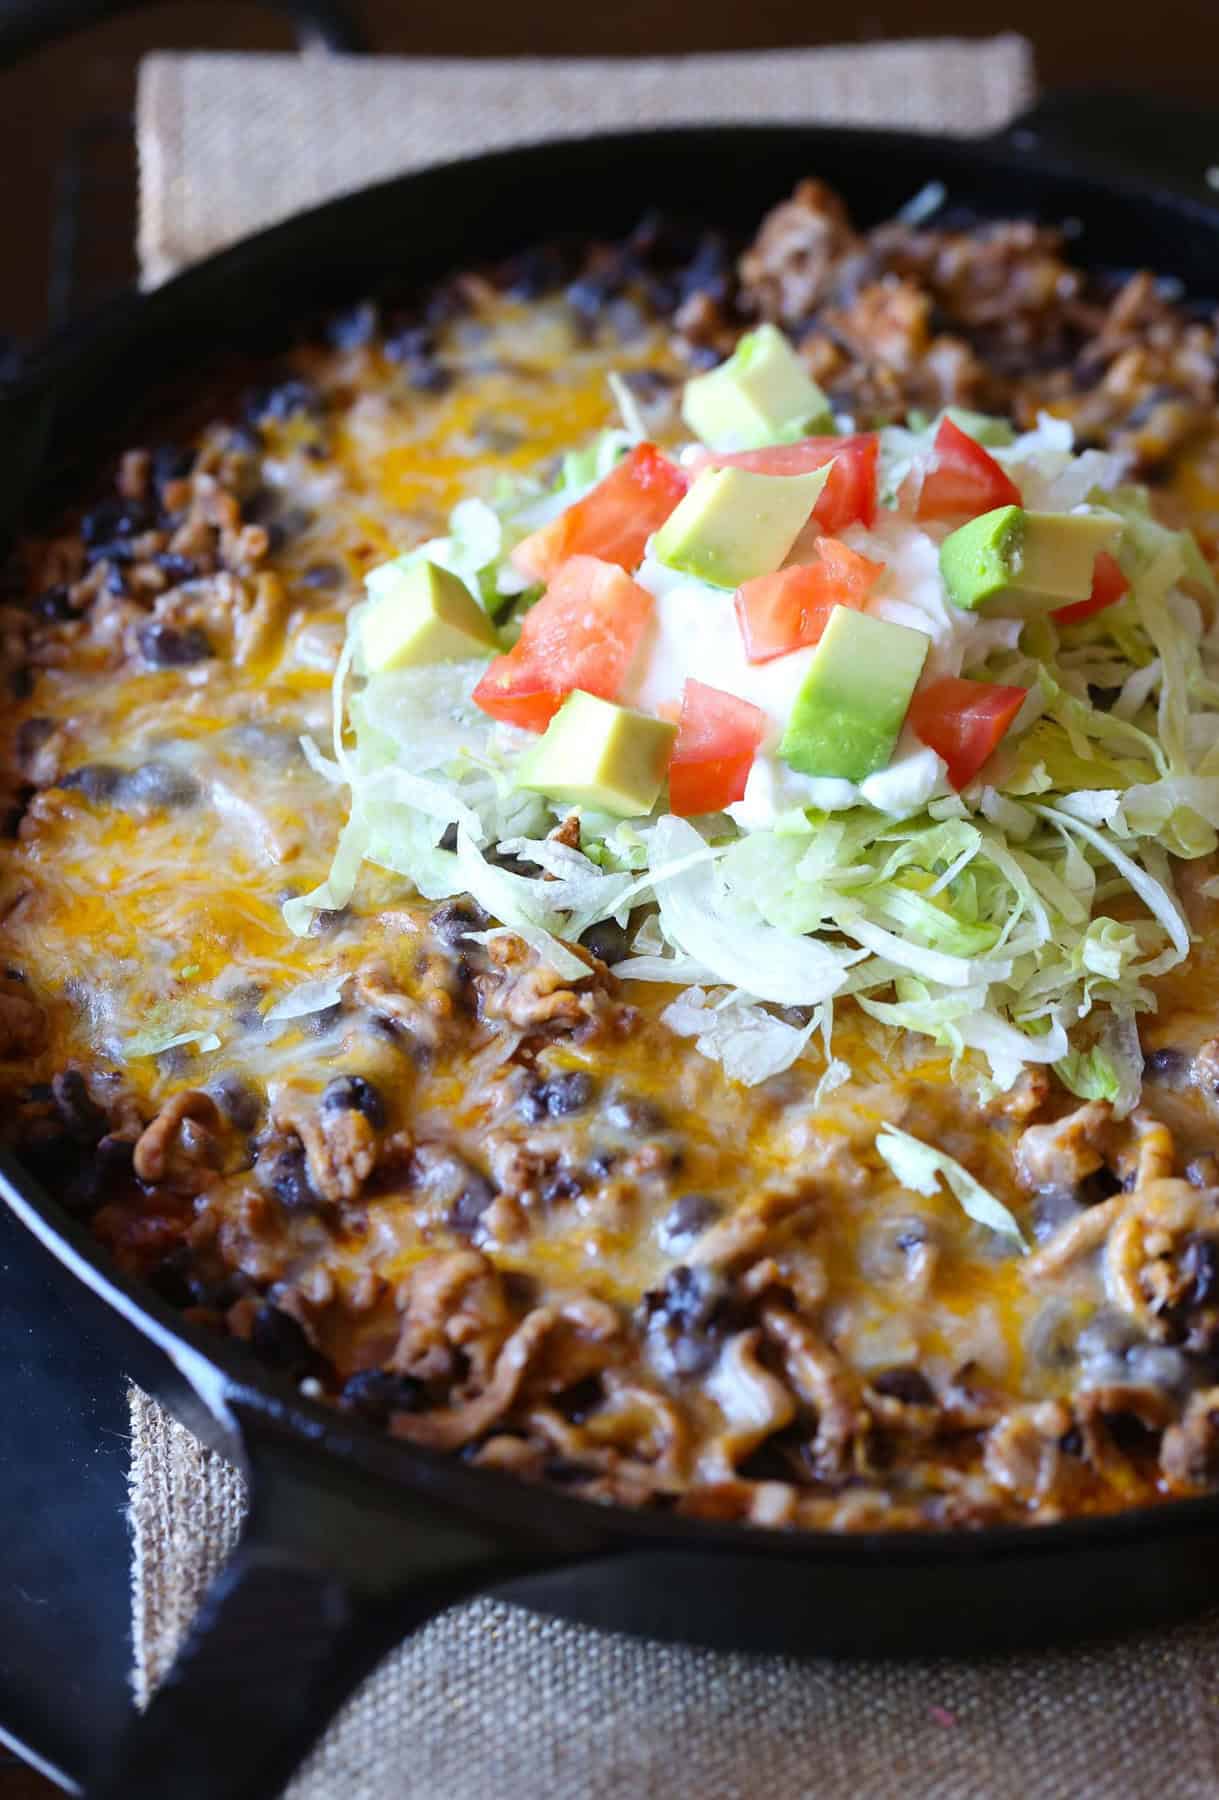 Skillet Tamale Pie served to eat right out of the skillet